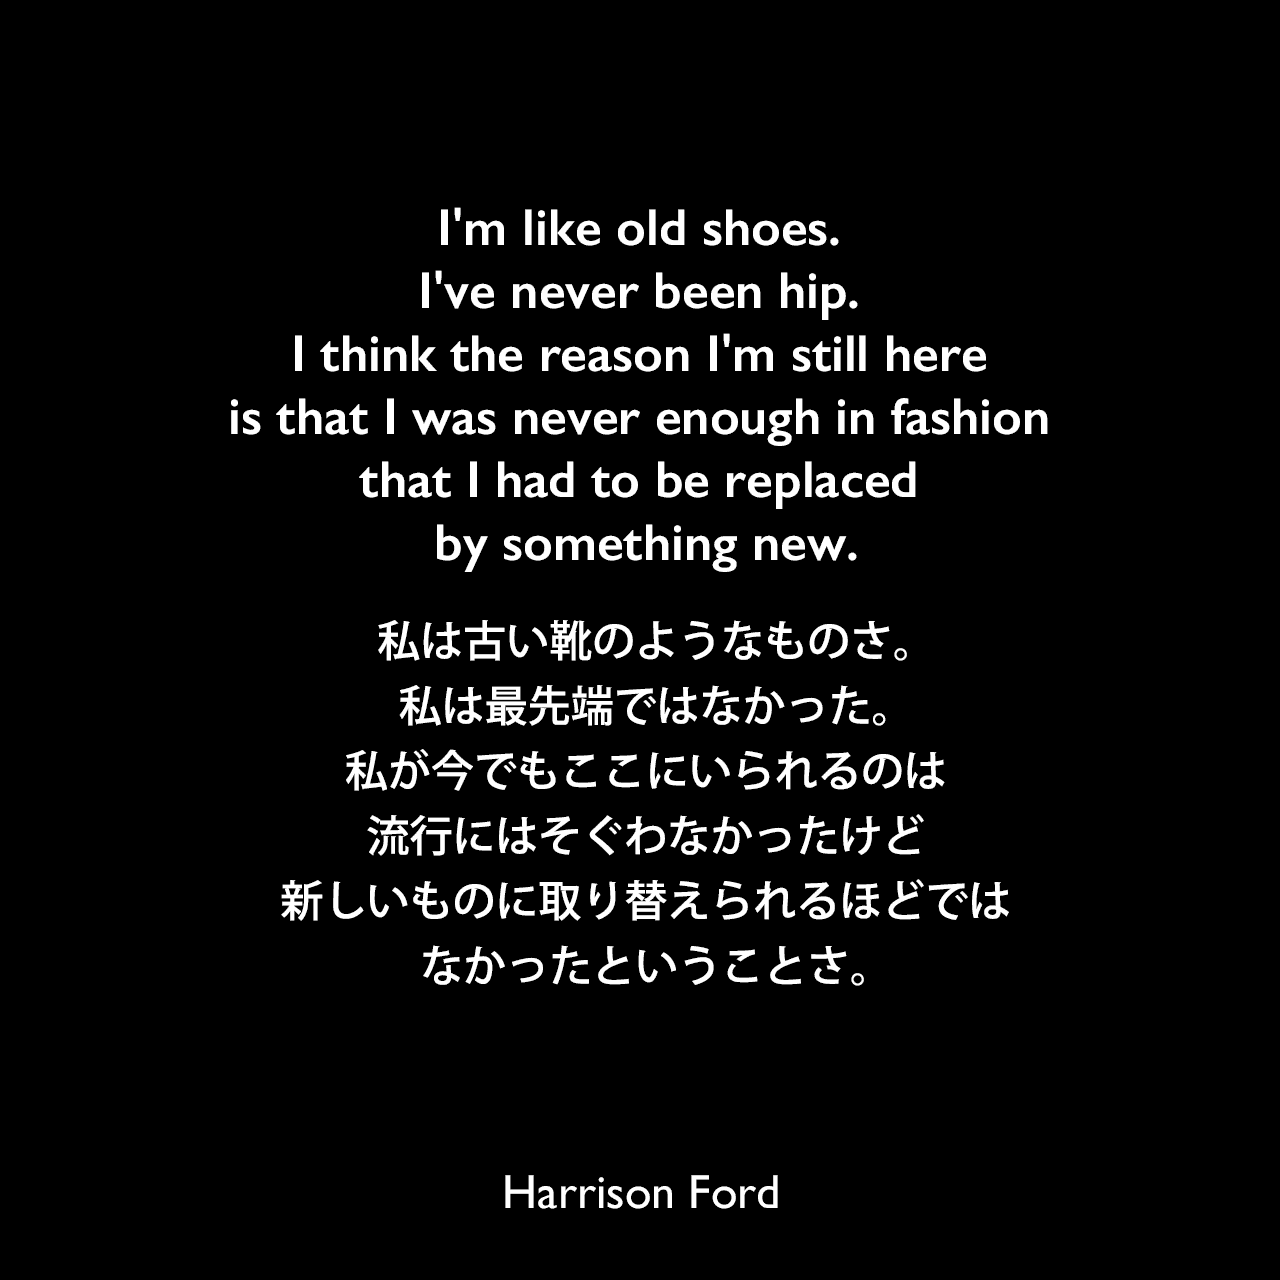 I'm like old shoes. I've never been hip. I think the reason I'm still here is that I was never enough in fashion that I had to be replaced by something new.私は古い靴のようなものさ。私は最先端ではなかった。私が今でもここにいられるのは、流行にはそぐわなかったけど、新しいものに取り替えられるほどではなかったということさ。Harrison Ford